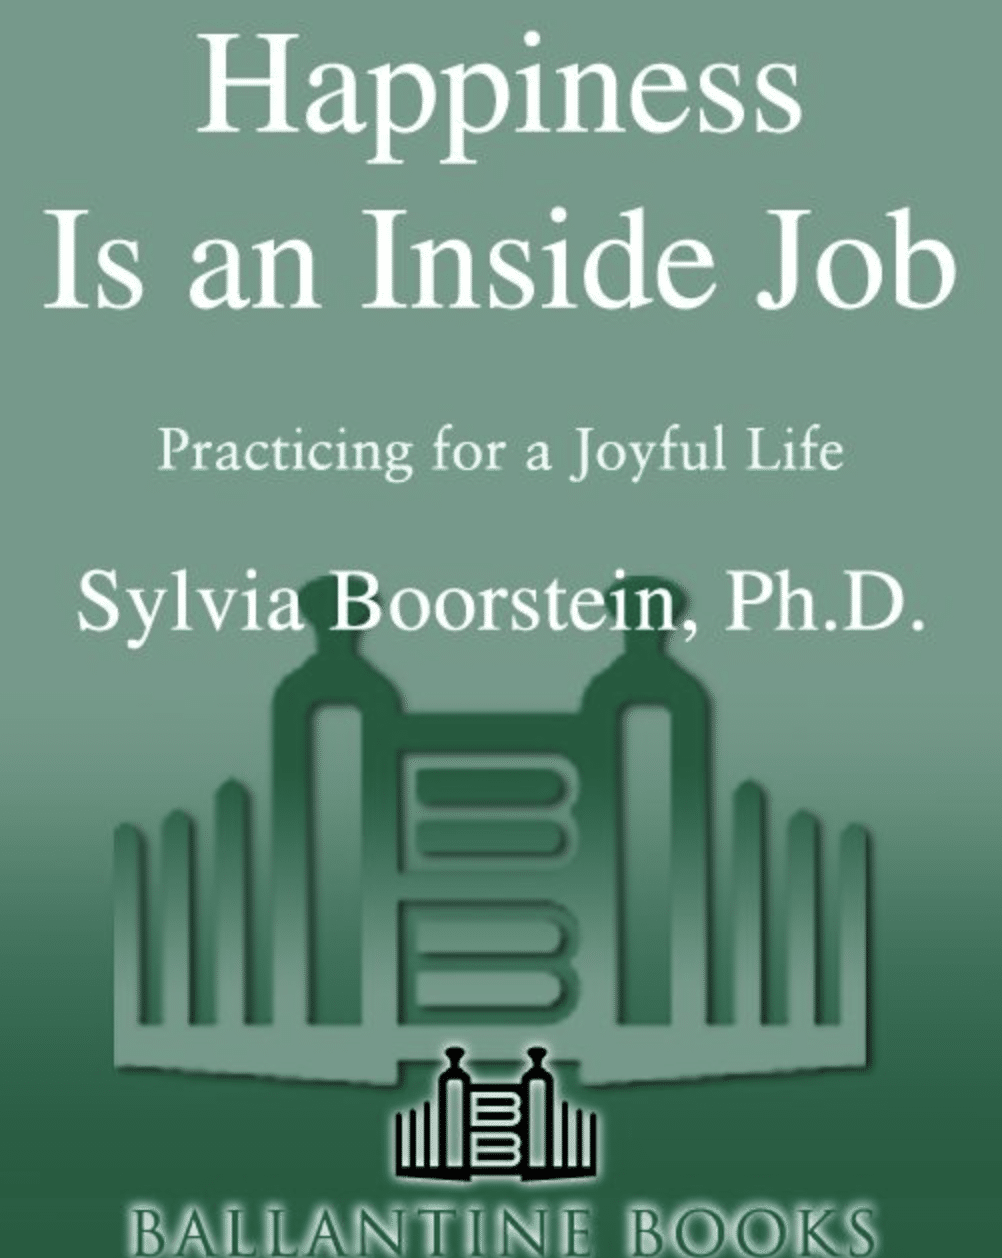 Happiness Is An Inside Job by Sylvia Boorstein, PhD